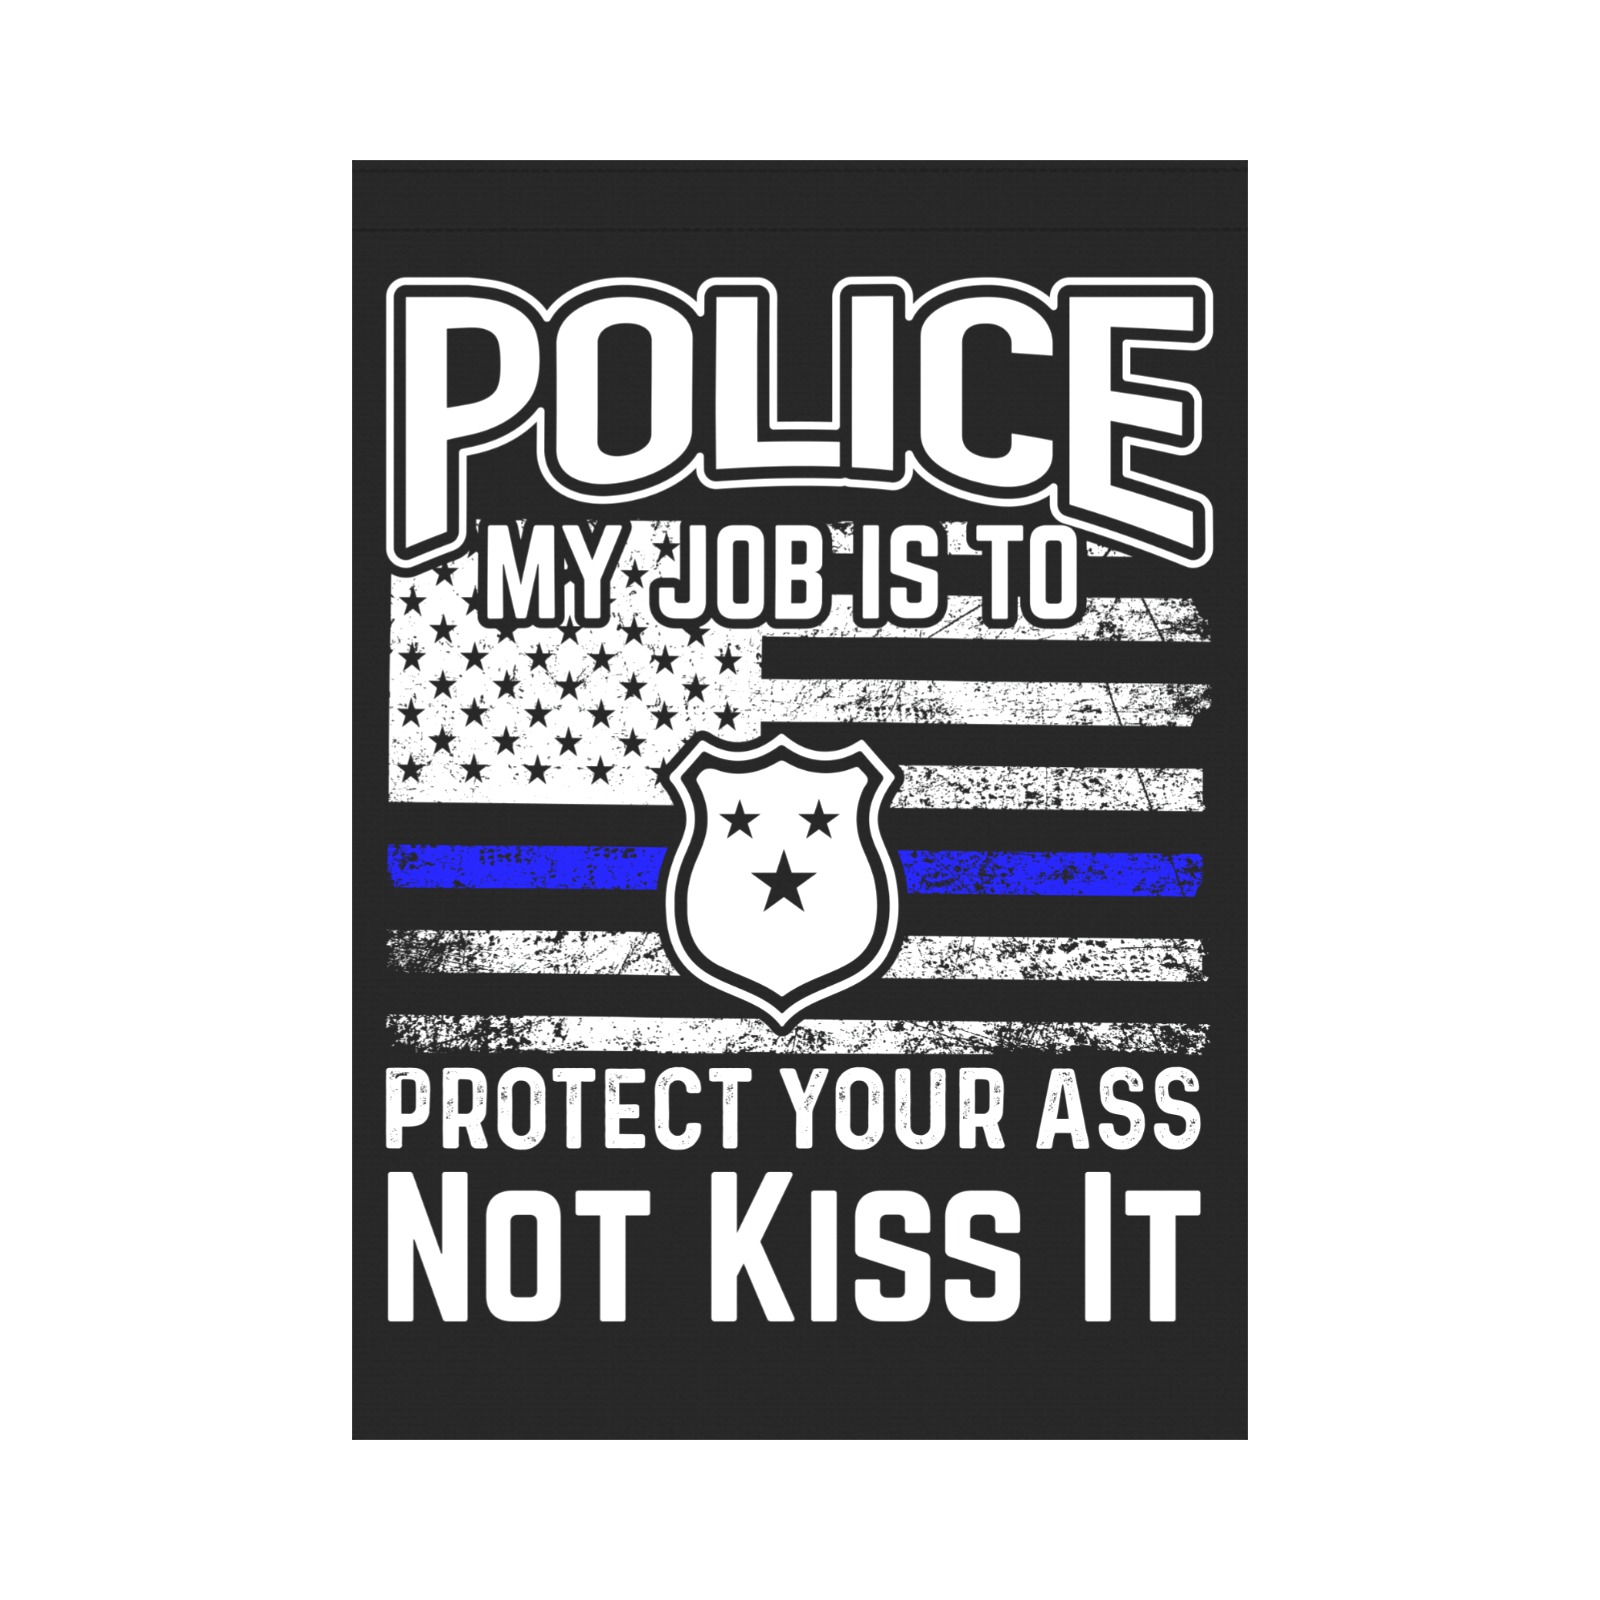 Police My Job Is To Protect Your Ass Not Kiss It Garden Flag 28''x40'' （Without Flagpole）